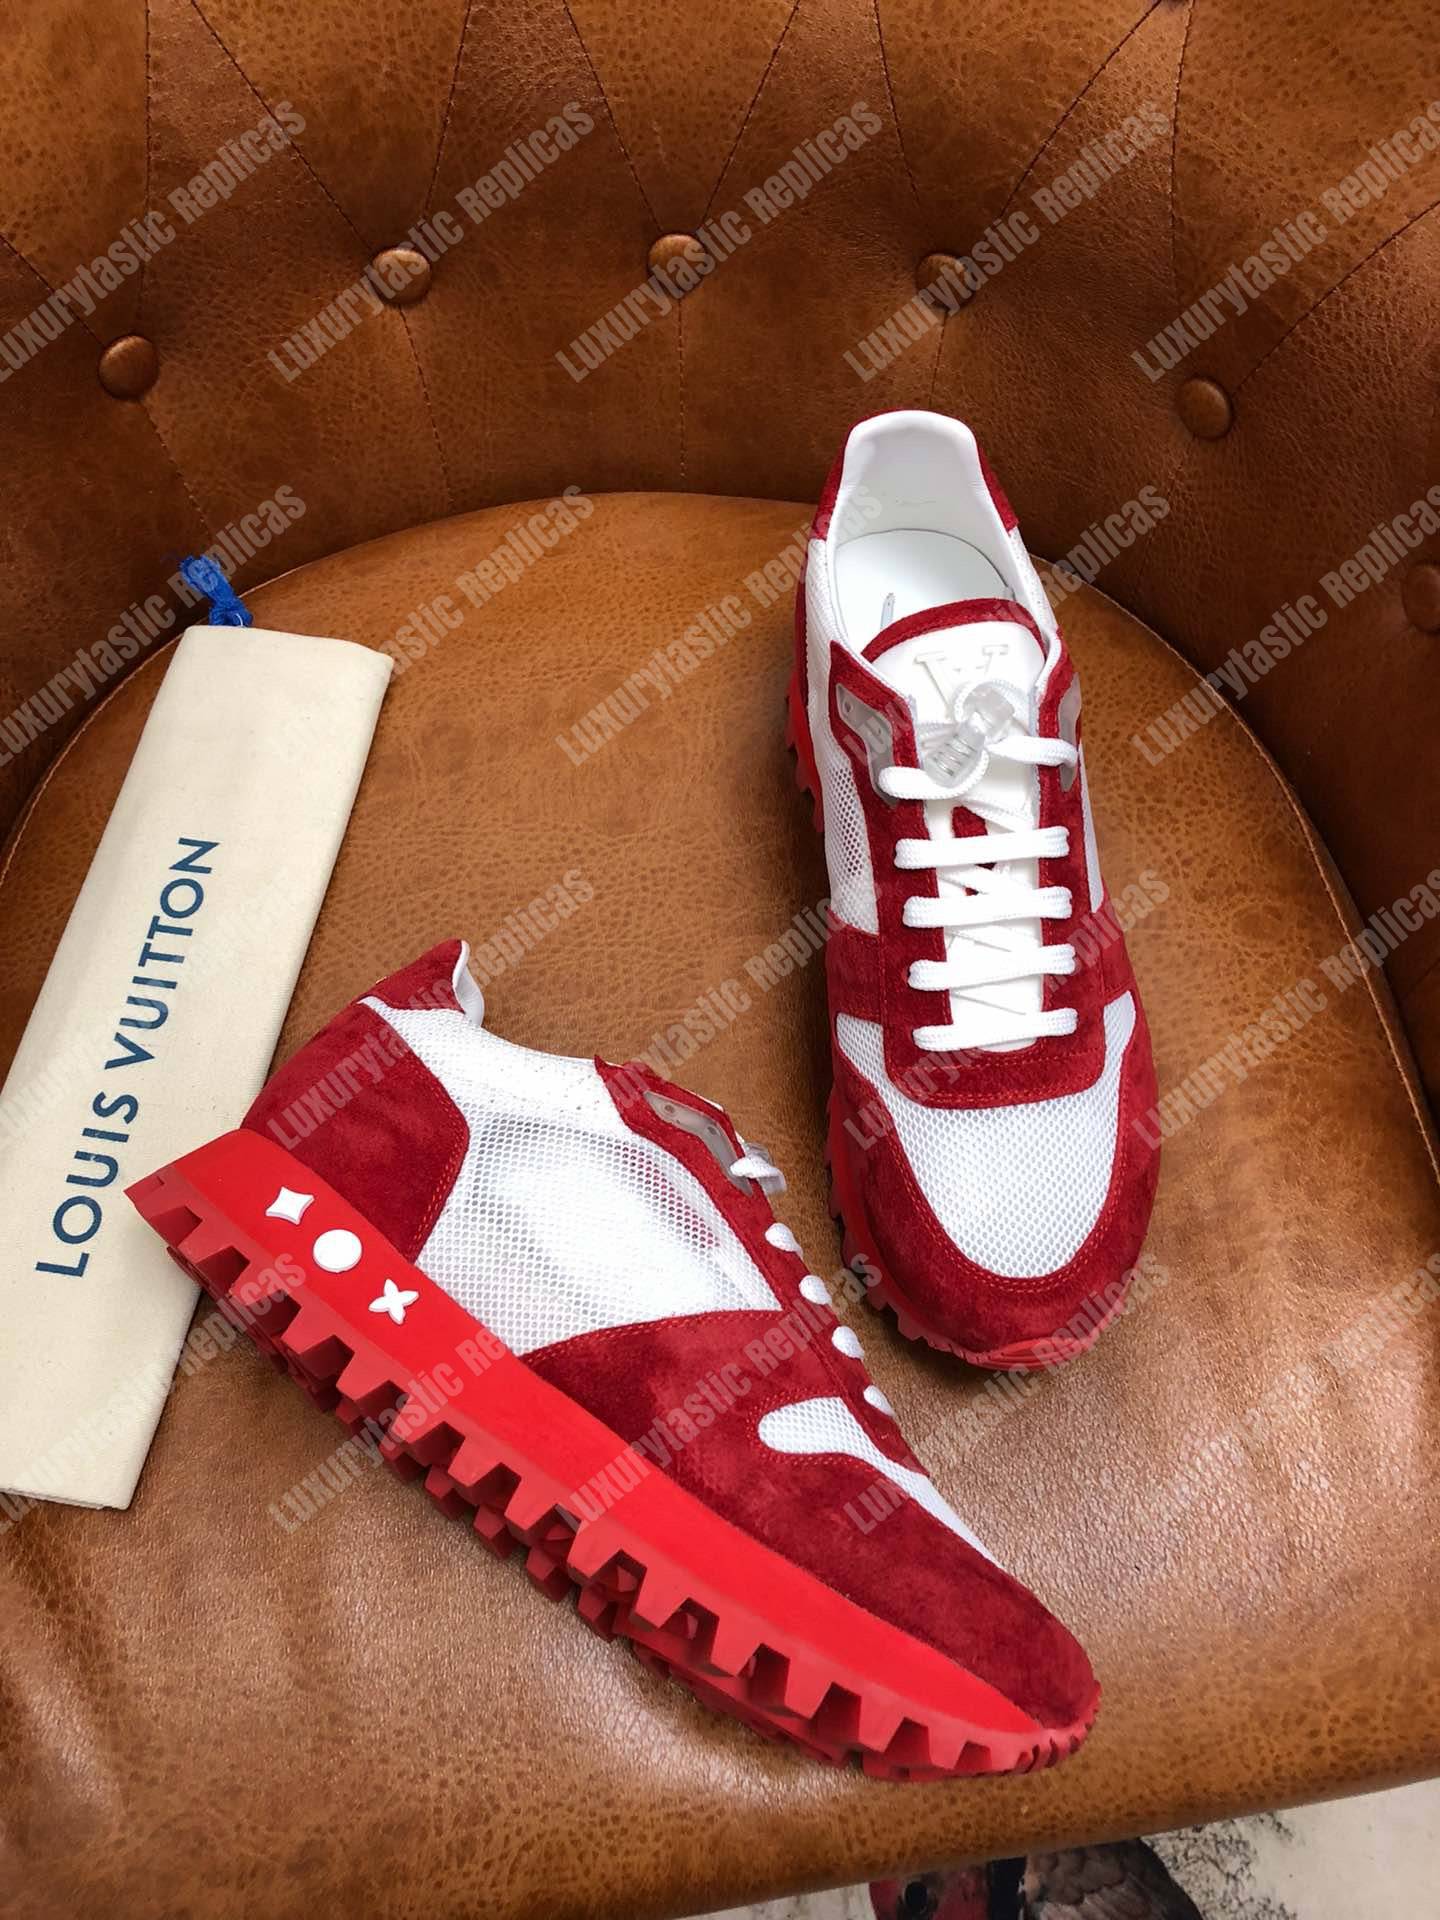 Louis Vuitton 2019 LV Runner Sneakers - Red Sneakers, Shoes - LOU227158